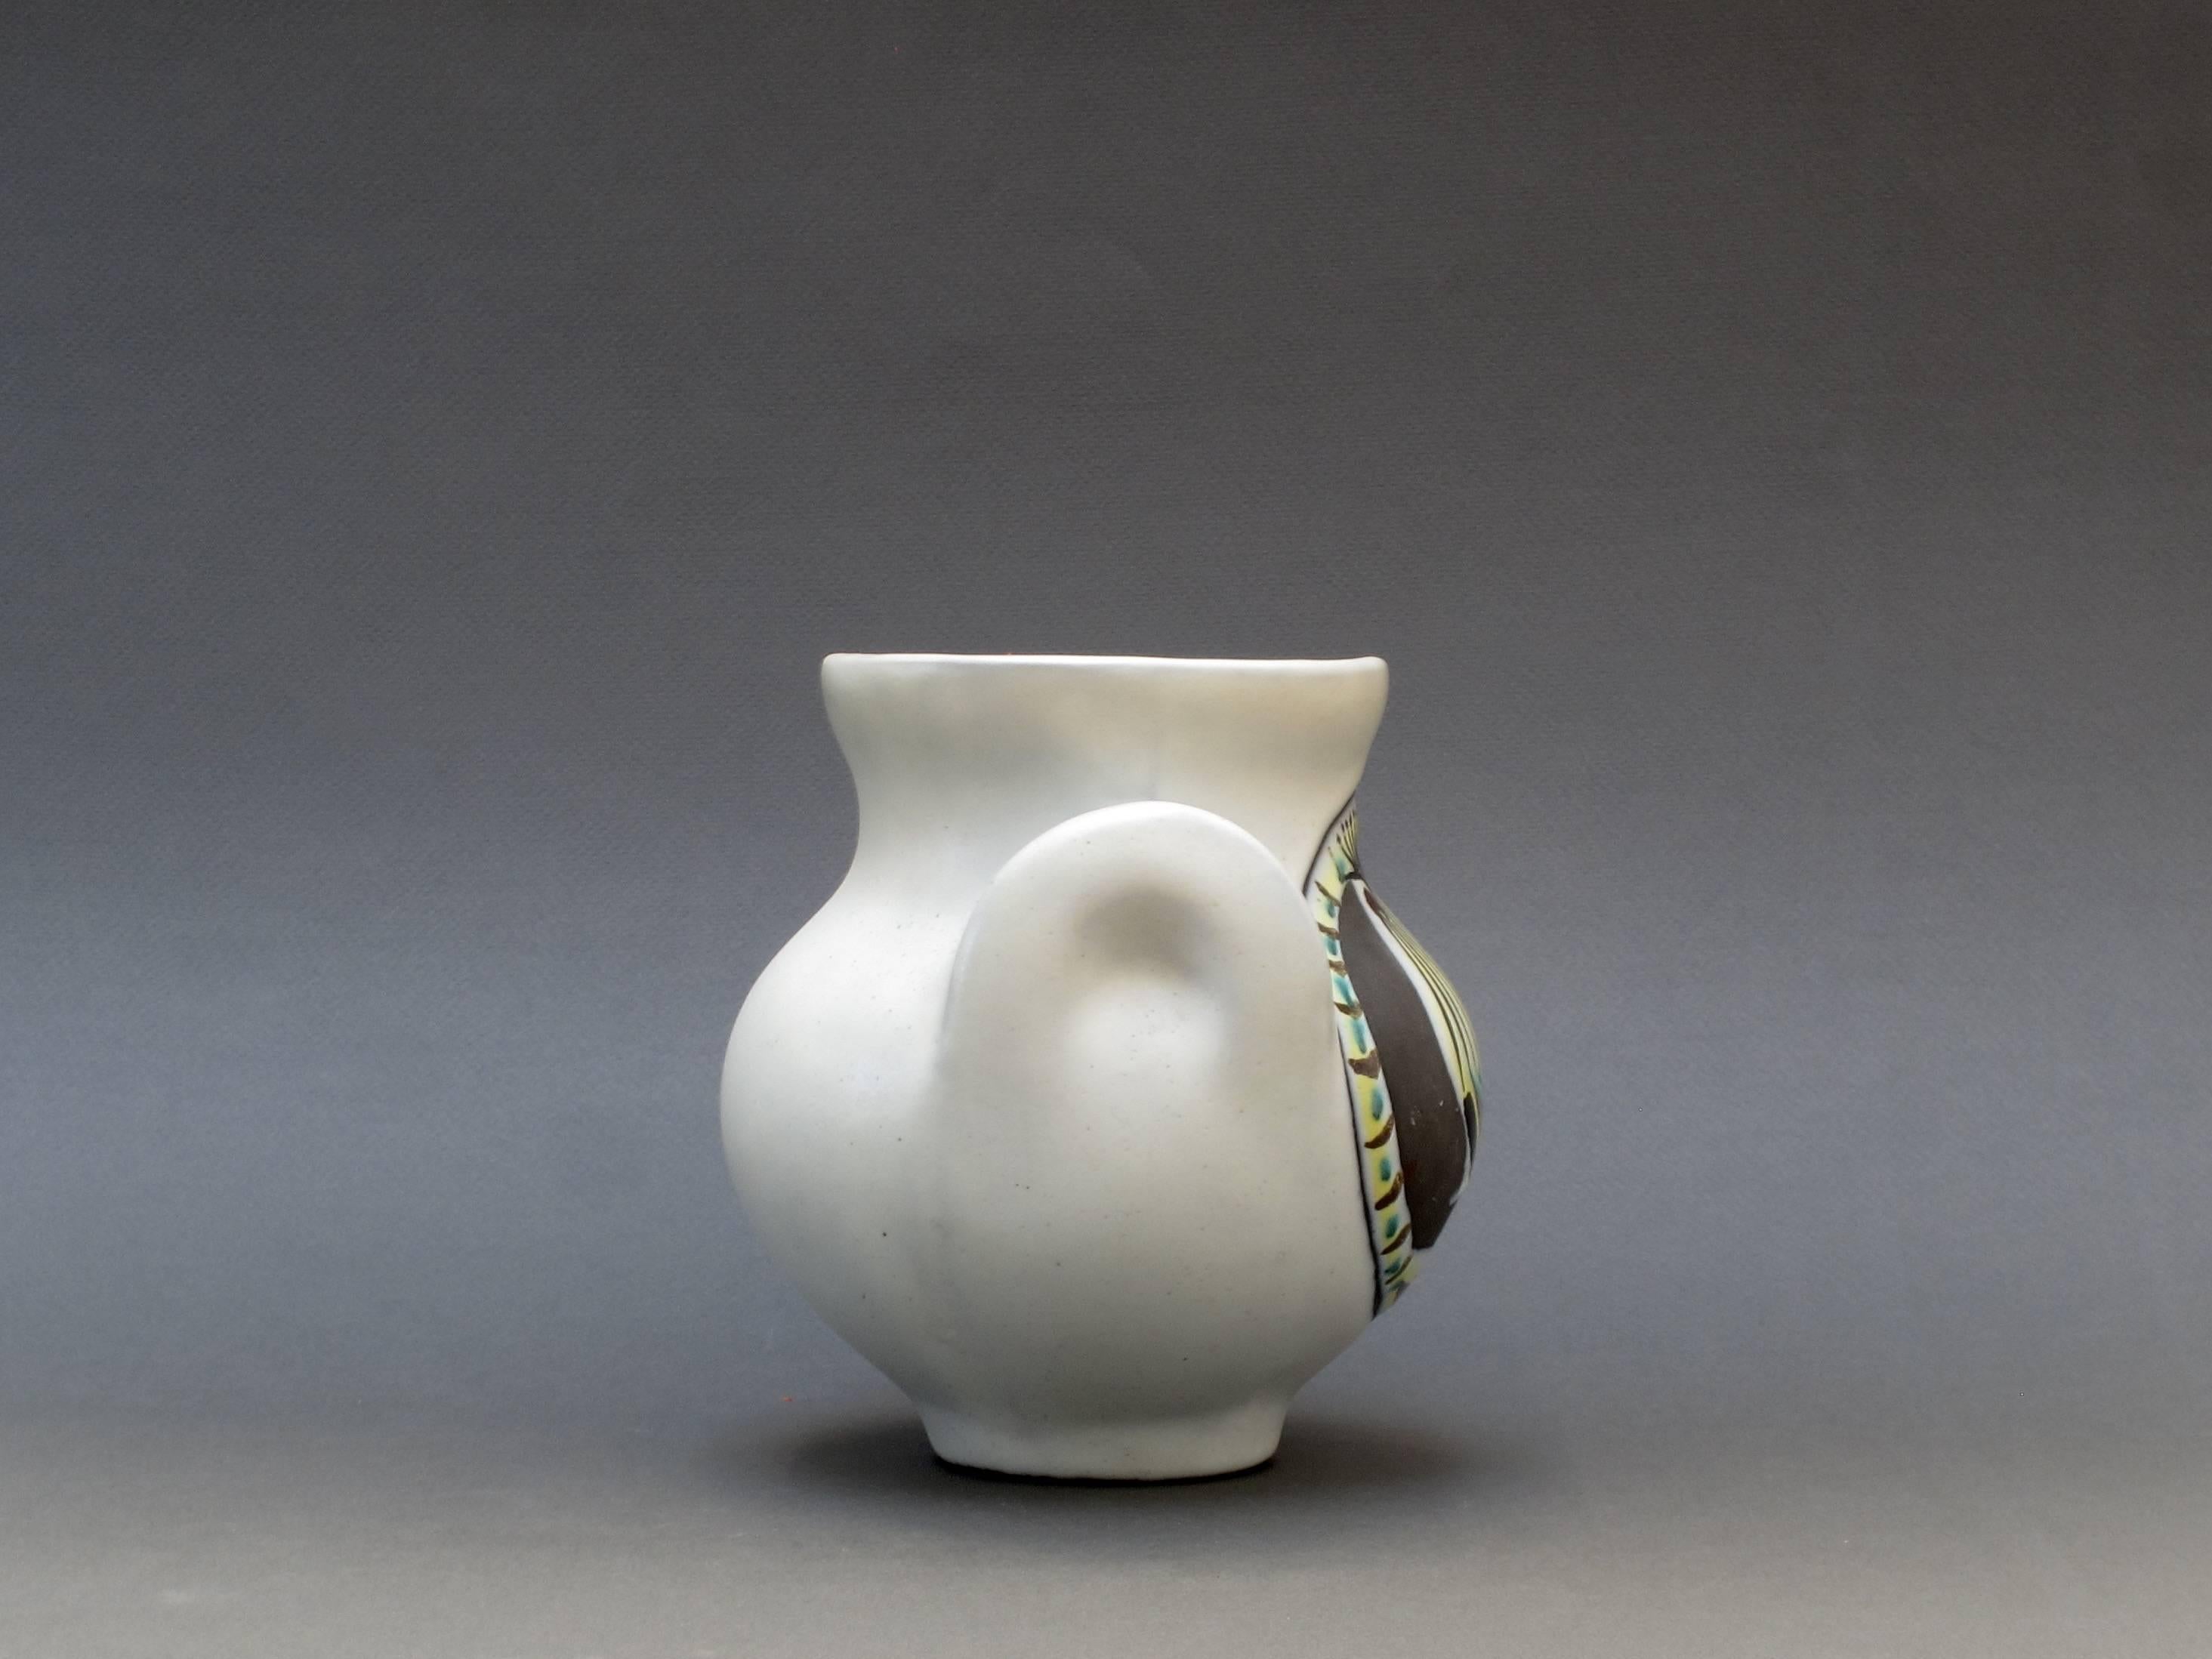 Ceramic 'Eared' Vase ‘Vase à Oreilles’ with Rooster by Roger Capron, 1950s 1